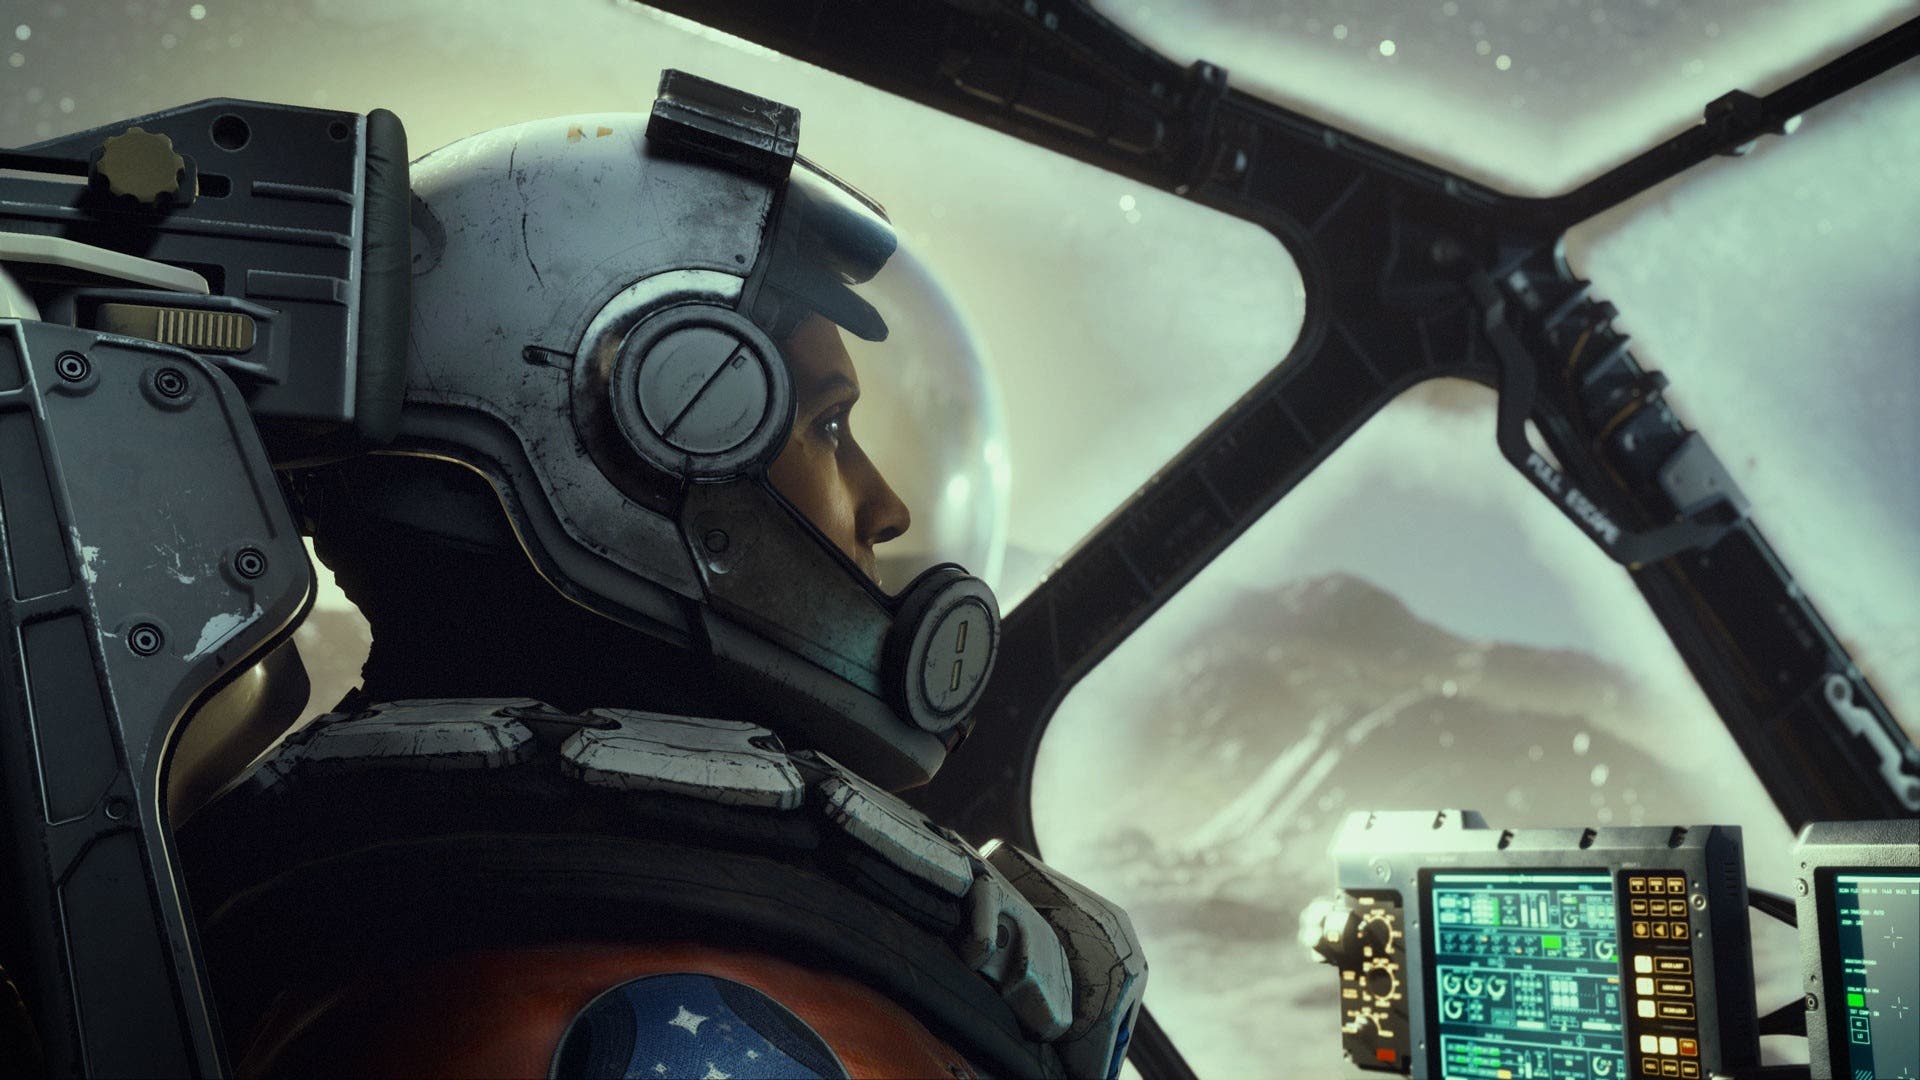 Star Citizen shows off new and improved first-person gunplay in 60fps video